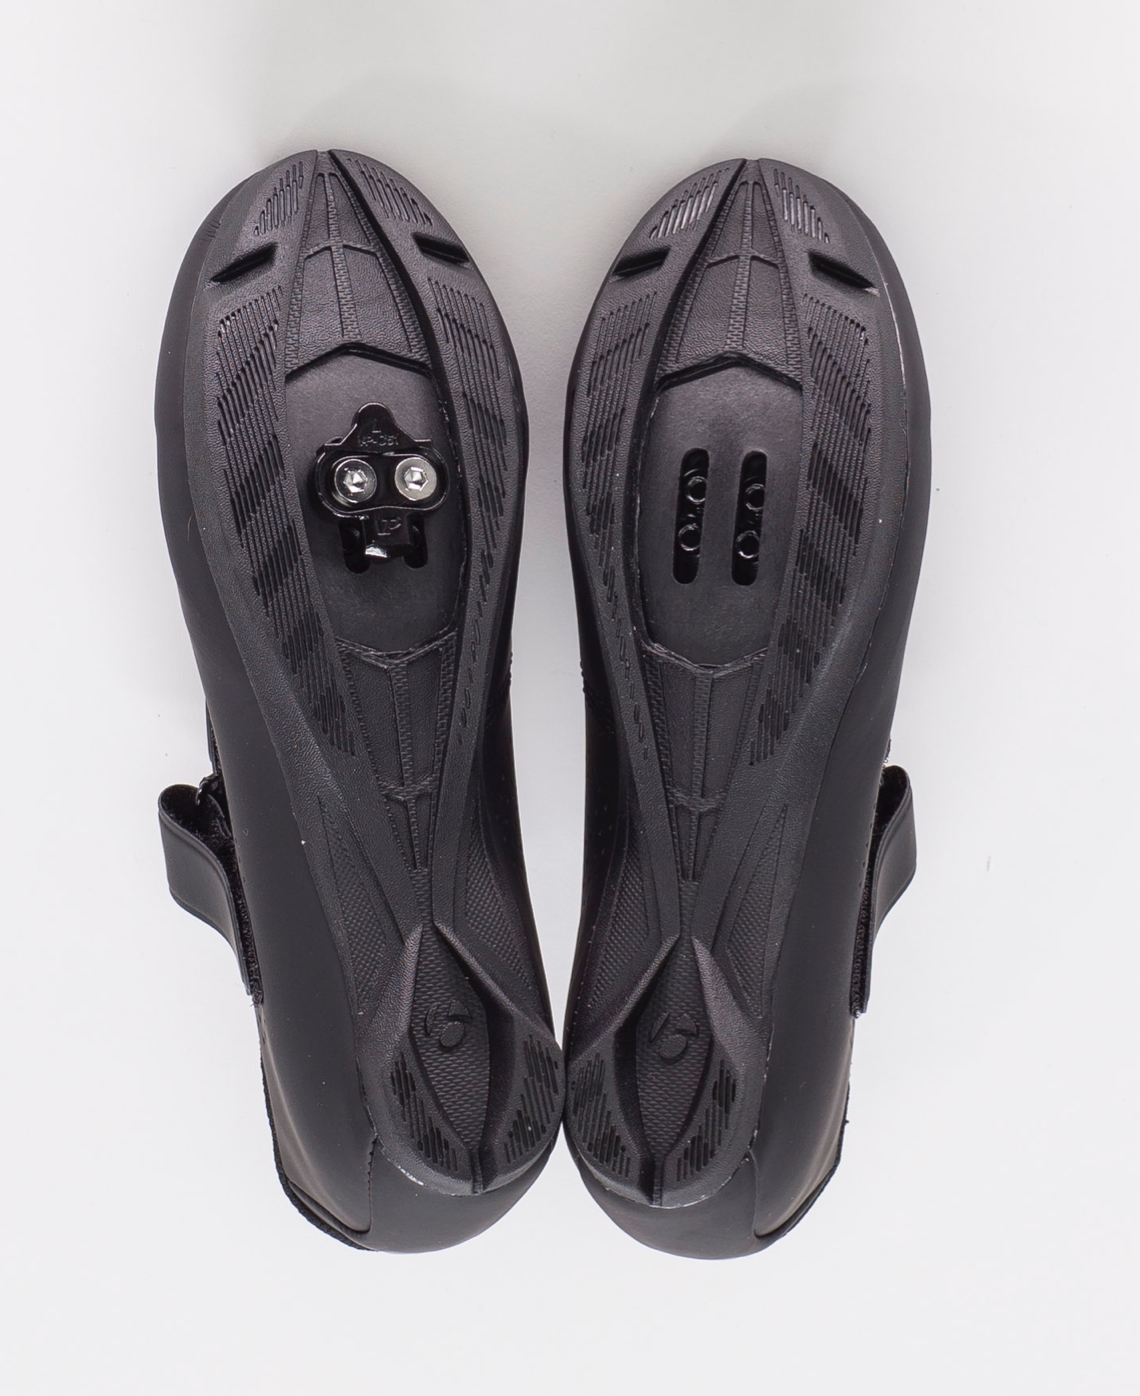 cycling shoes and clips